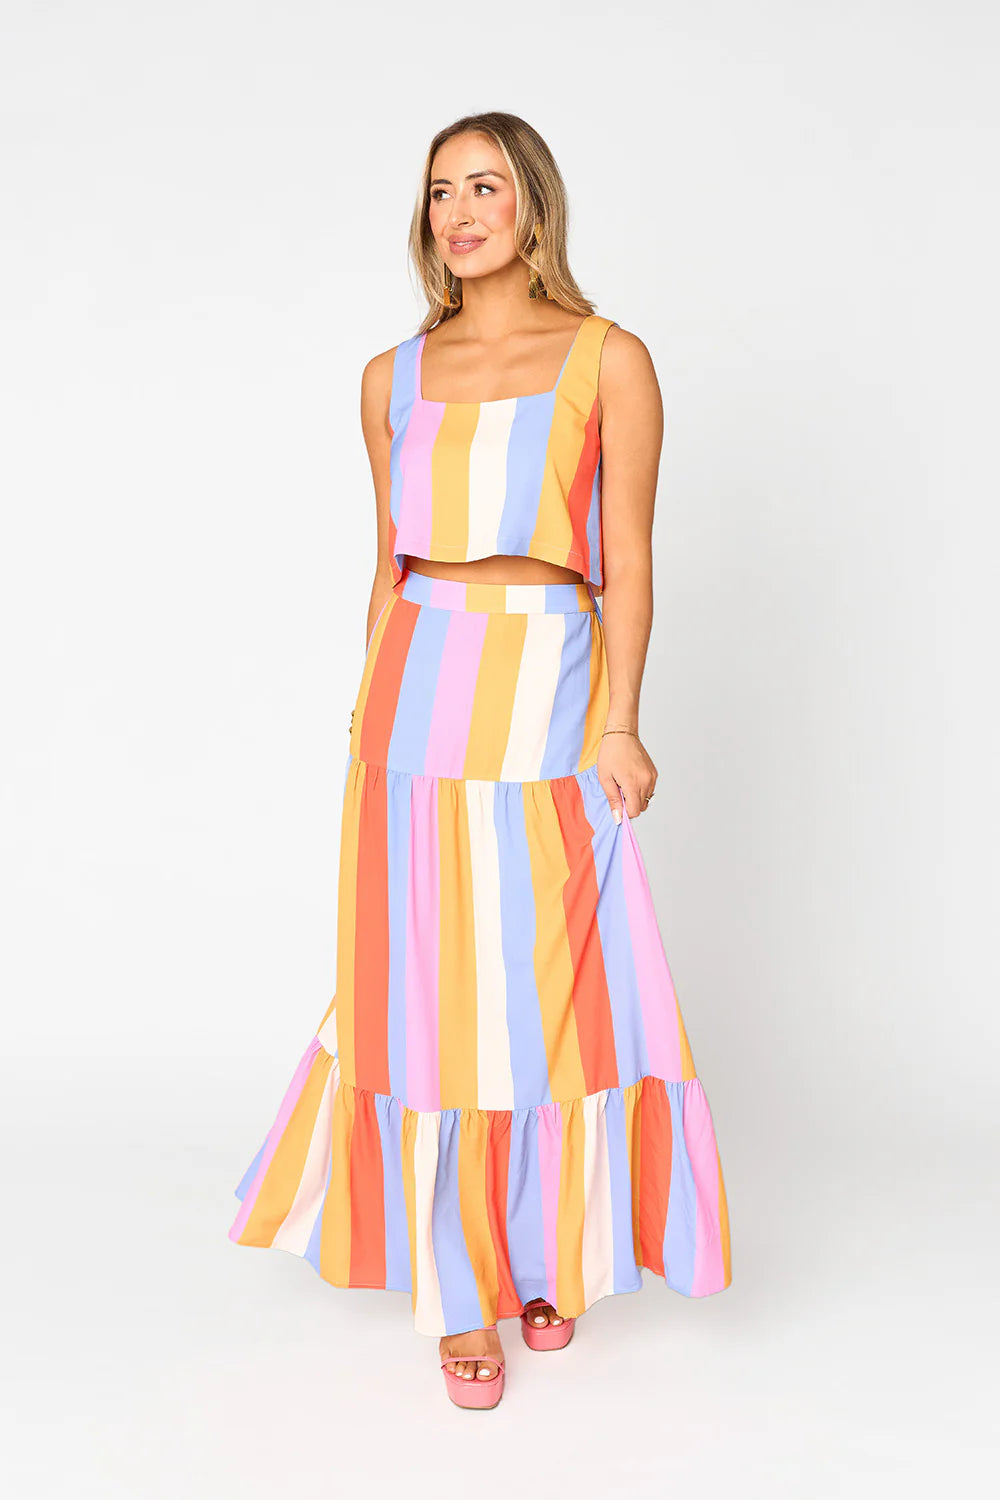 Buddy love cookie maxi skirt stripped  set in pool boy